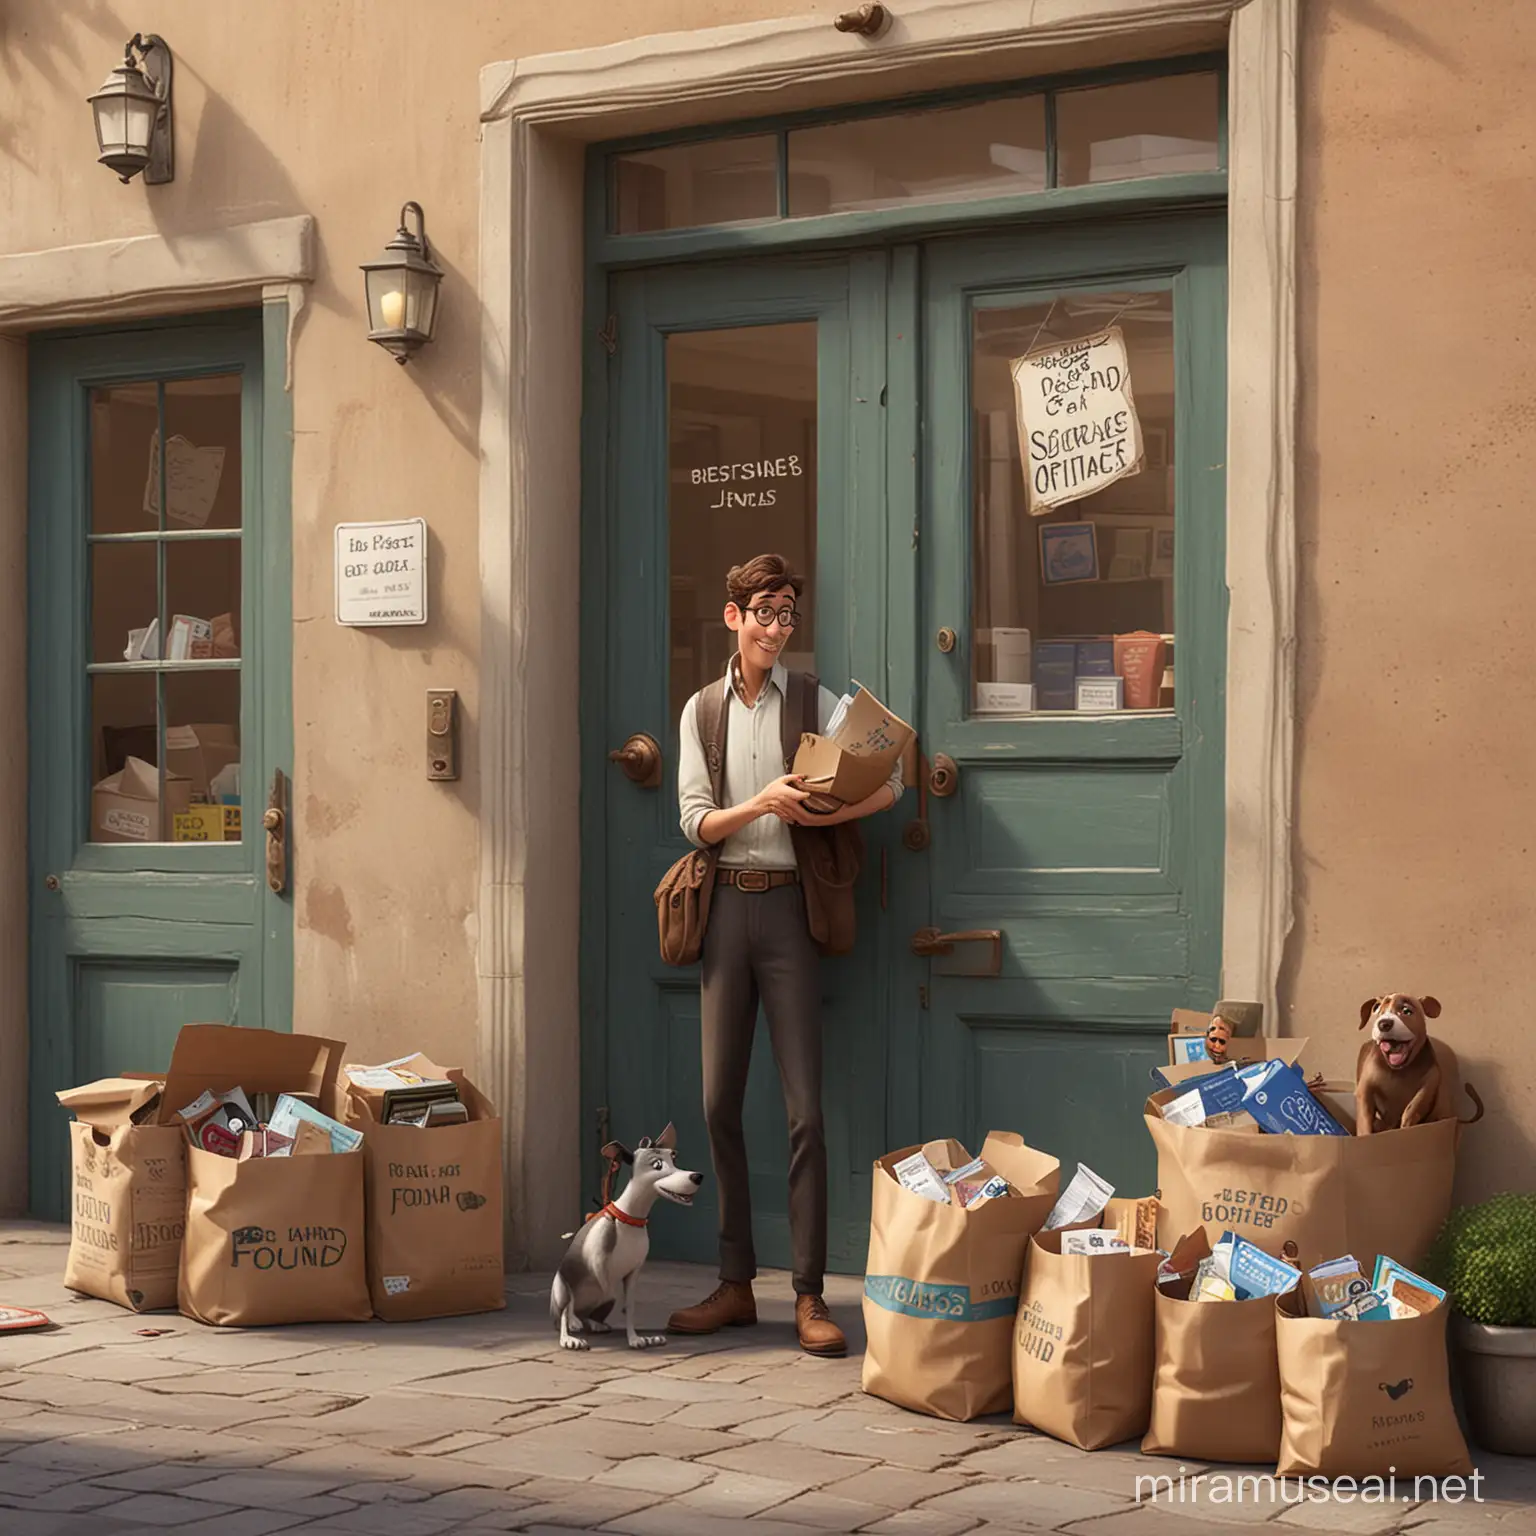 a man is Collecting at the lost and found office for animals ,disney pixar style

